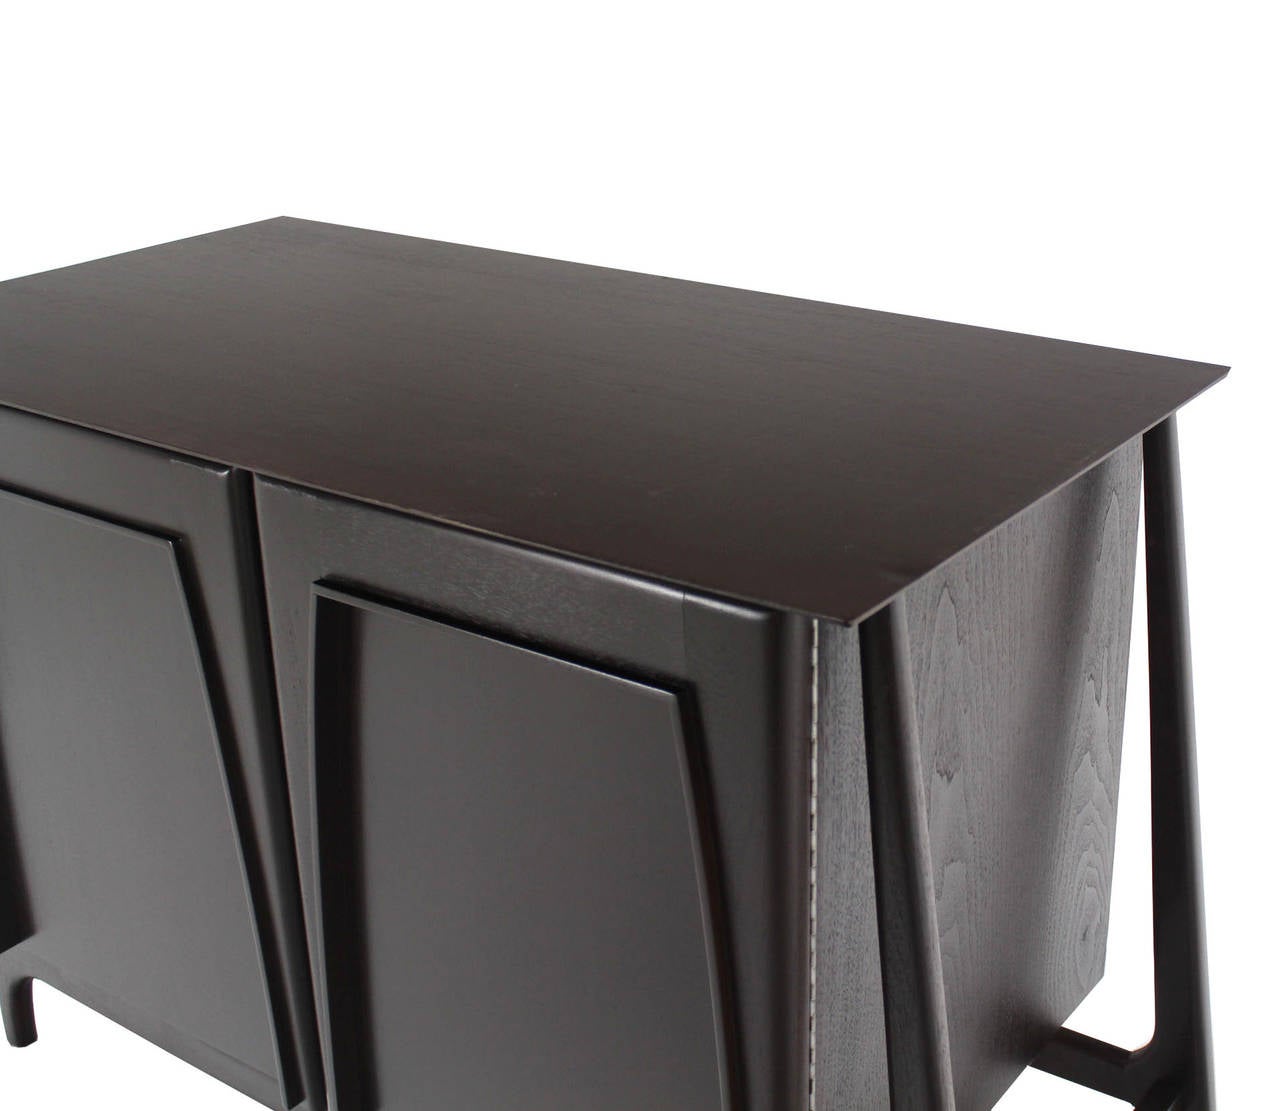 20th Century Two-Door Sculptural Exposed Leg Ebonized Server Three-Drawer Bachelor Chest